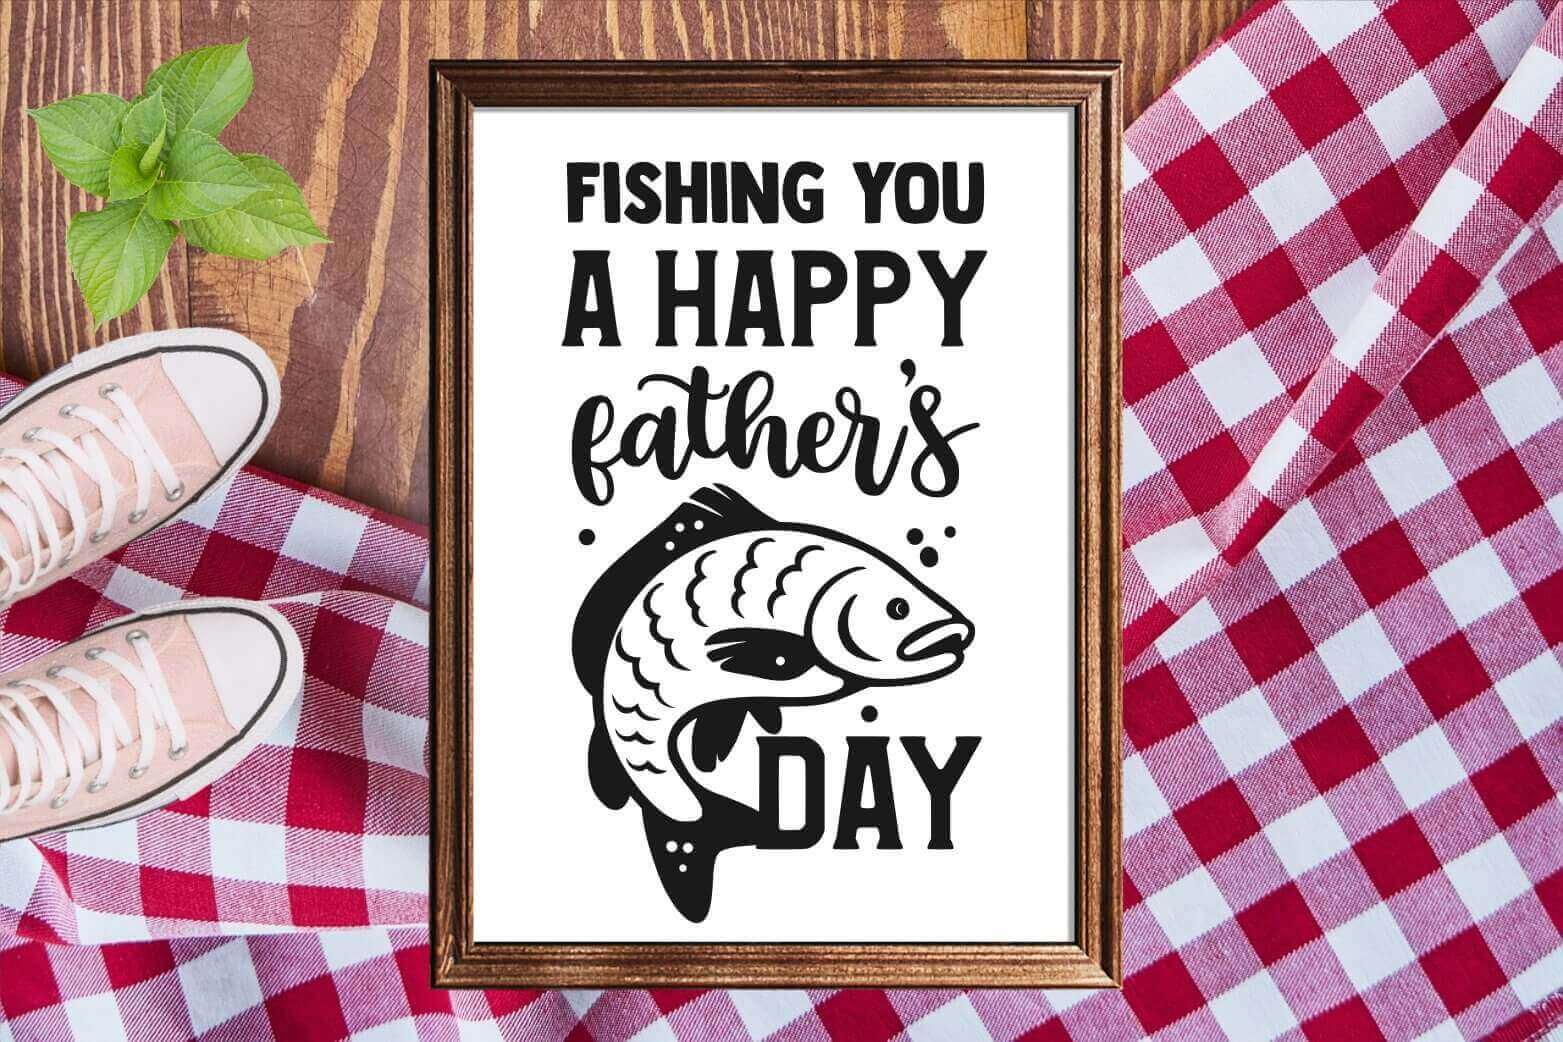 Fishing You a Happy Father's Day.